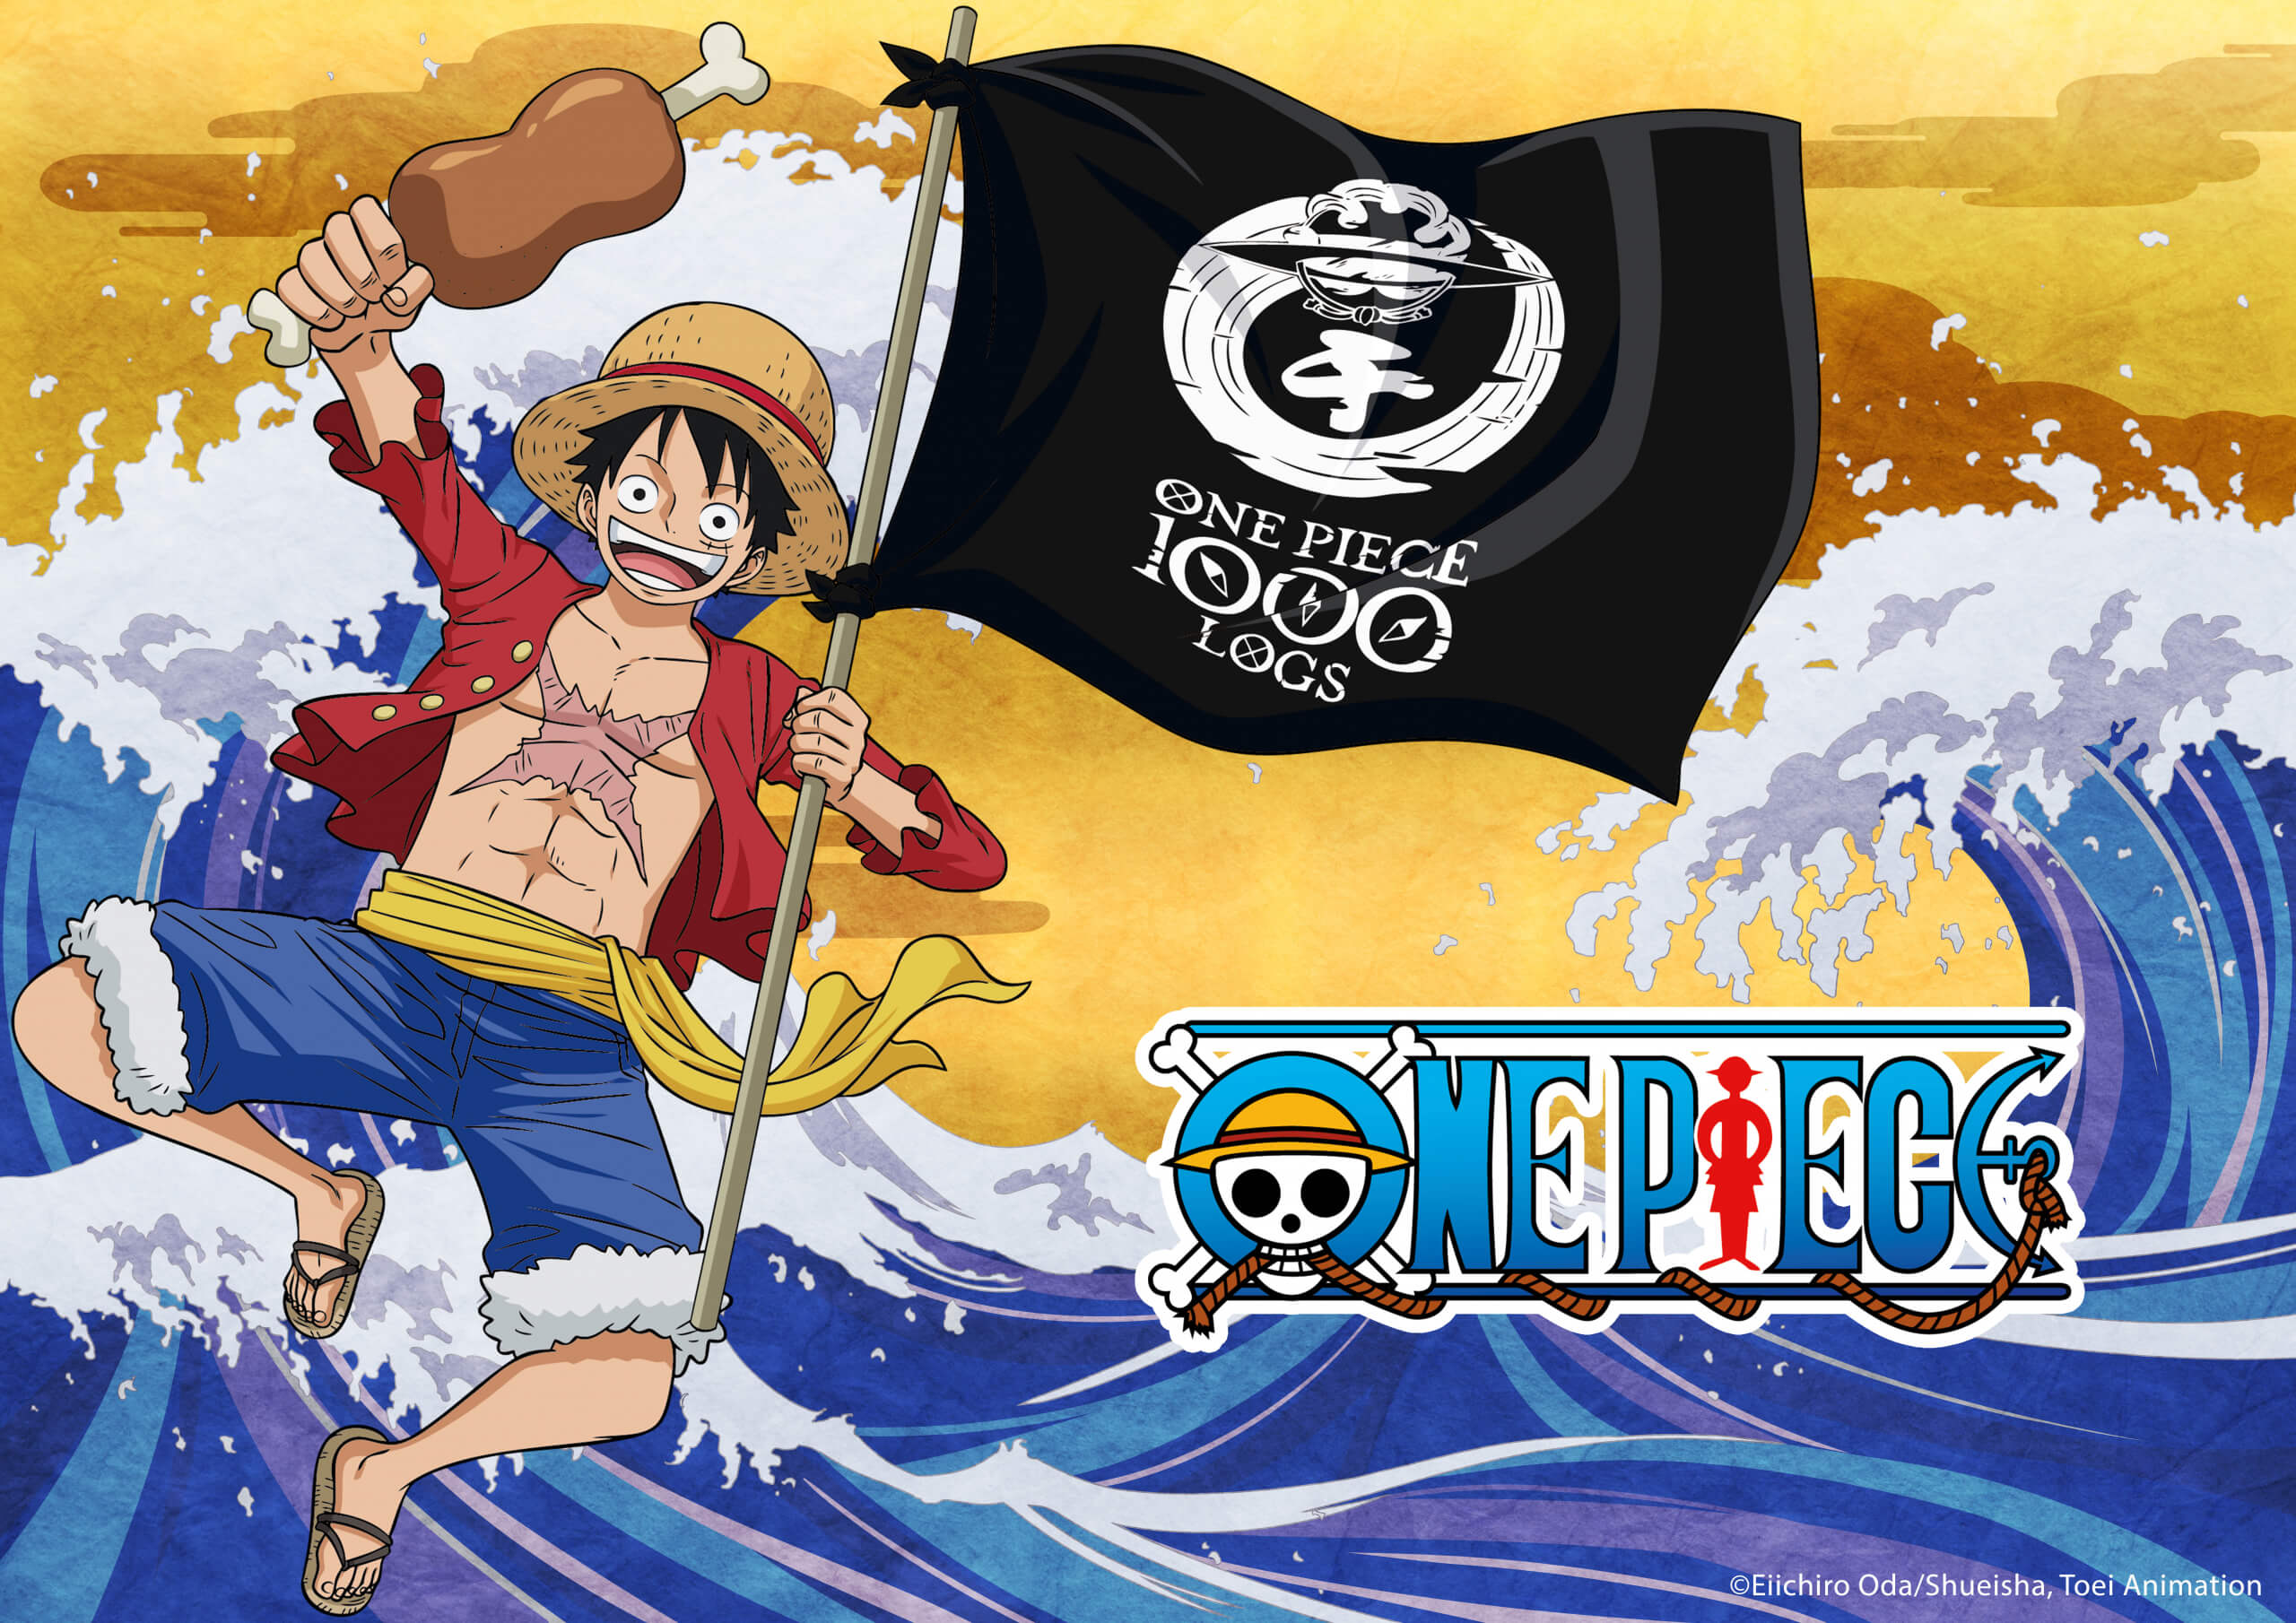 One Piece 1000 Logs Marathon Coming to France & Benelux on November 21st 👾  COSMOCOVER - The best PR agency for video games in Europe!